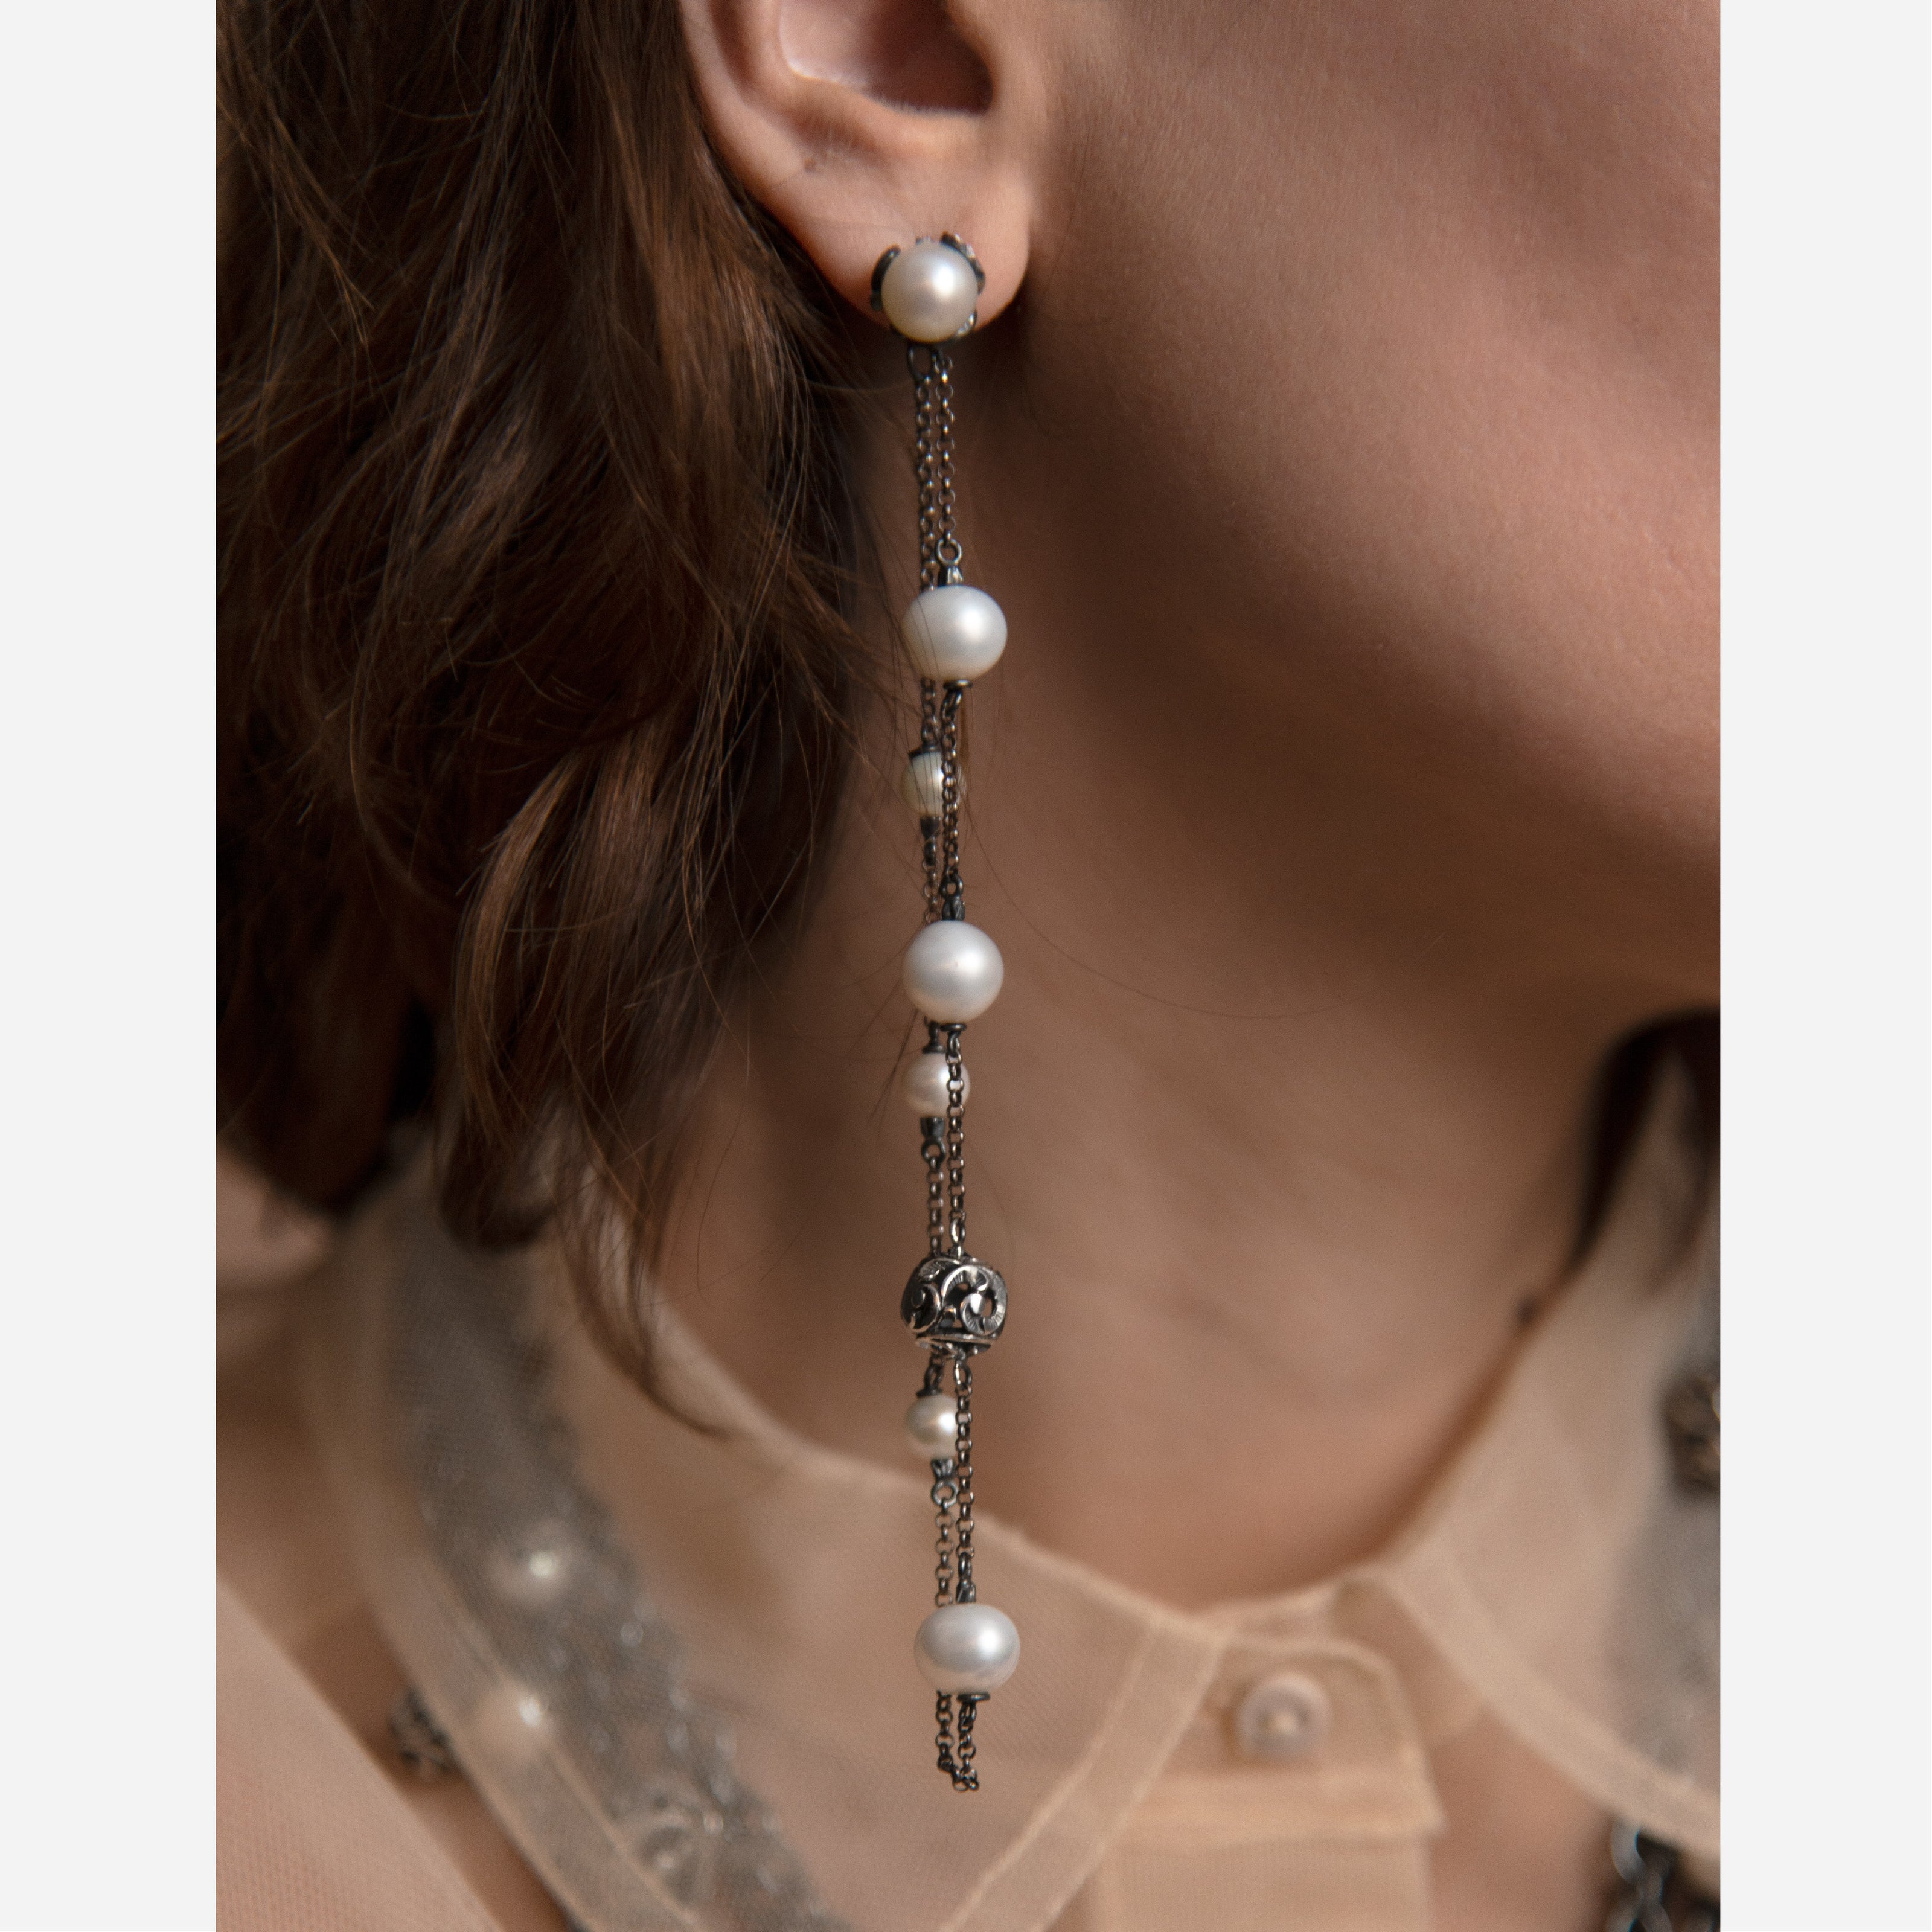 Pura earrings with natural pearls and carved silver sphere